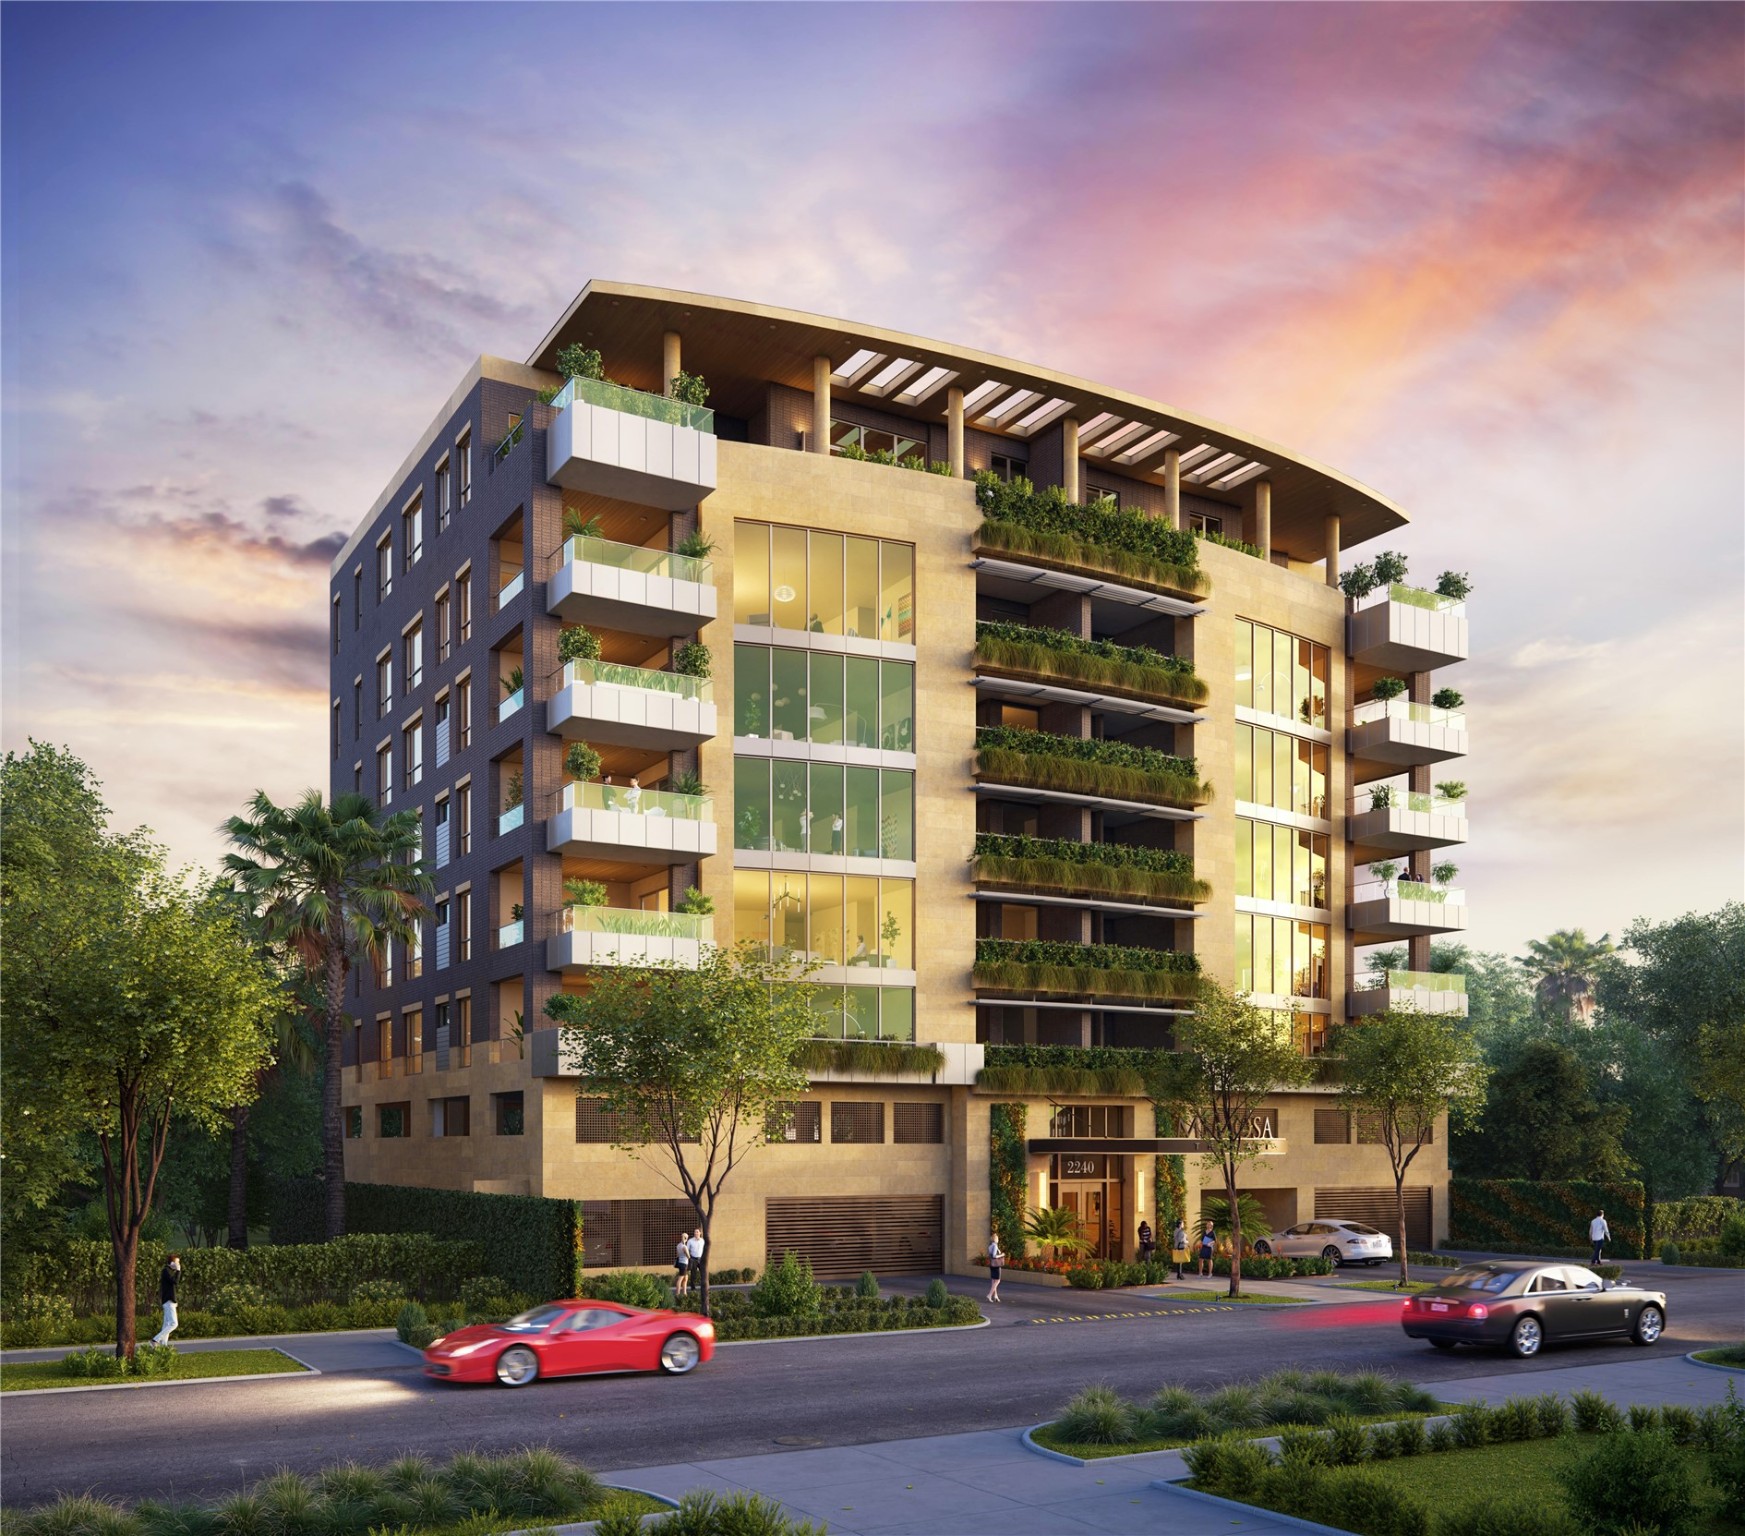 A boutique condominium with limestone exterior, floor-to-ceiling window walls, vertical gardens and expansive outdoor terraces, Mimosa Terrace is located on a quiet interior residential street in River Oaks, blending naturally into the landscape of this classic, upscale neighborhood.